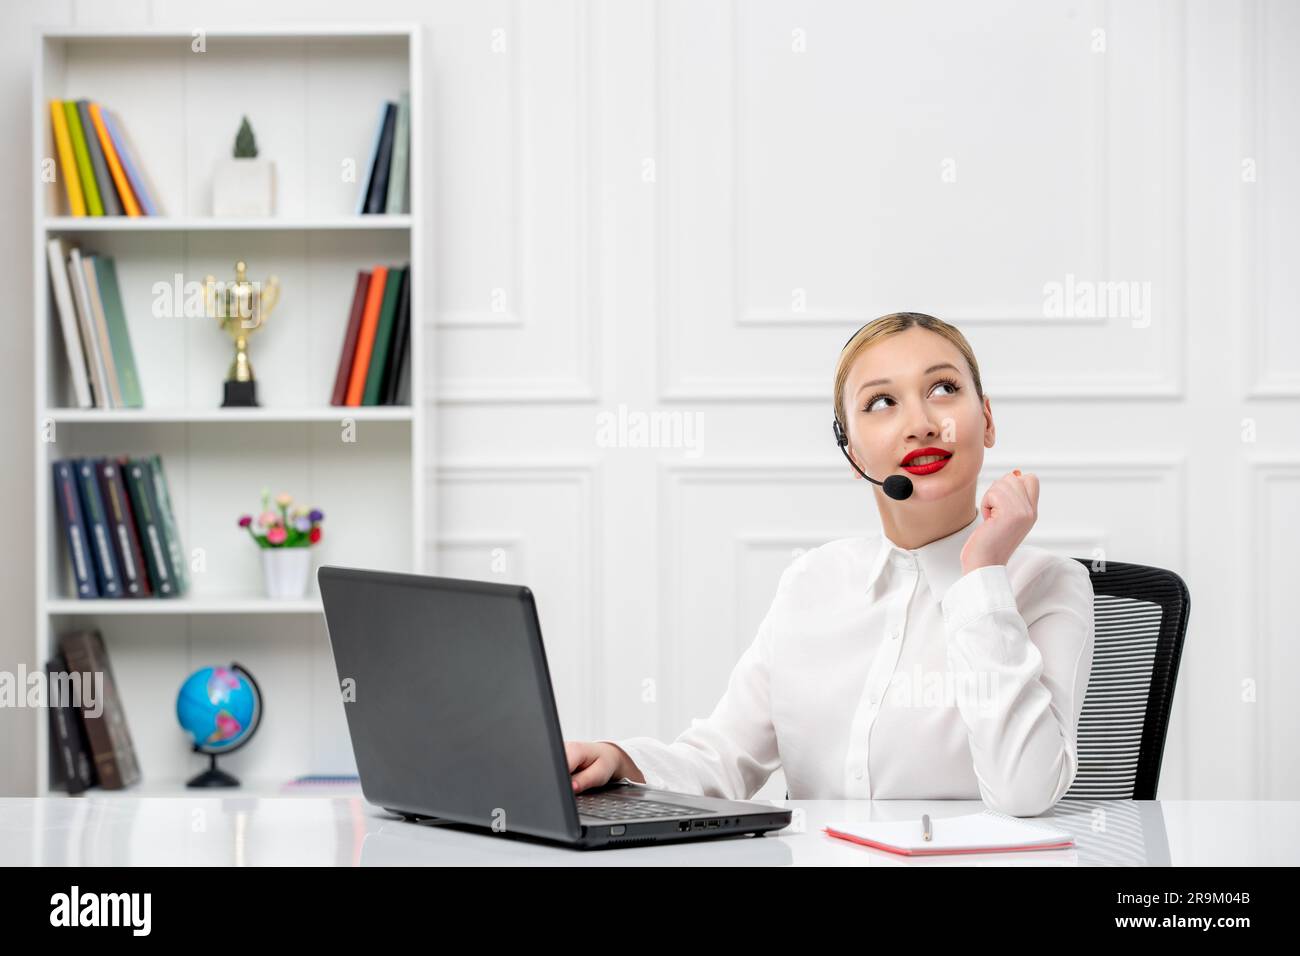 customer service cute blonde girl office shirt with headset and computer looking up and smiling Stock Photo